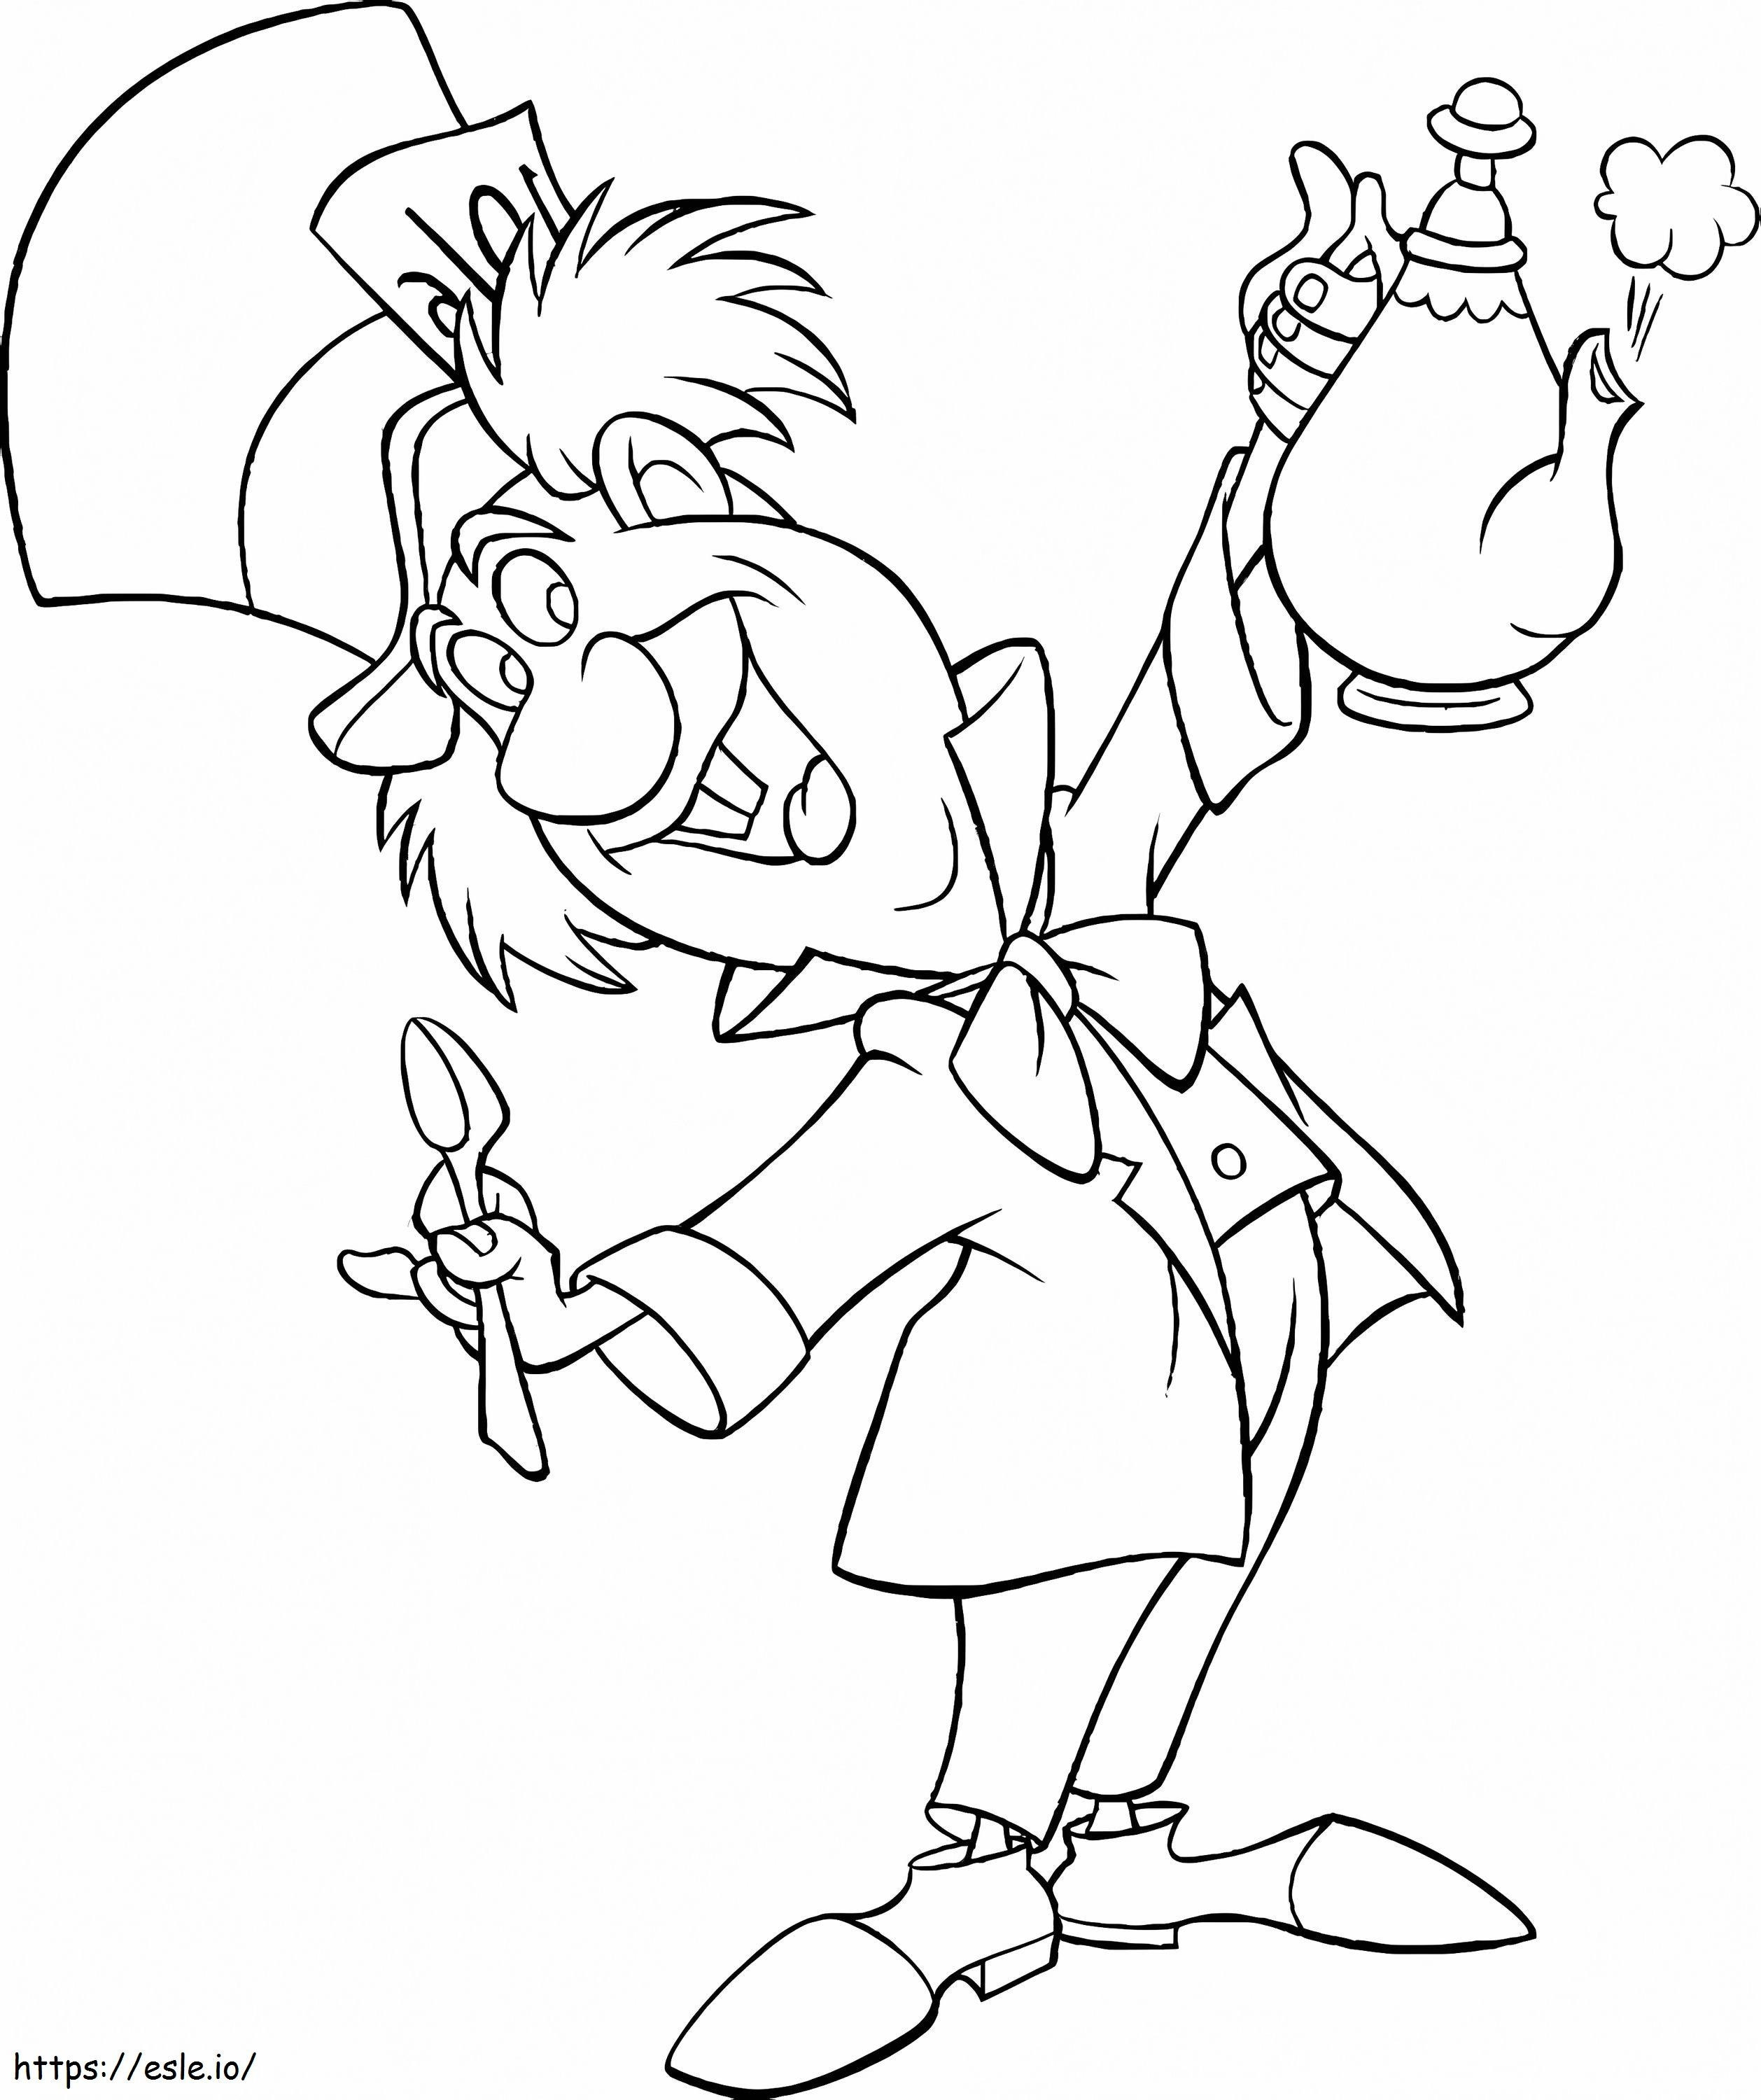 Mad Hatter And Teapot coloring page